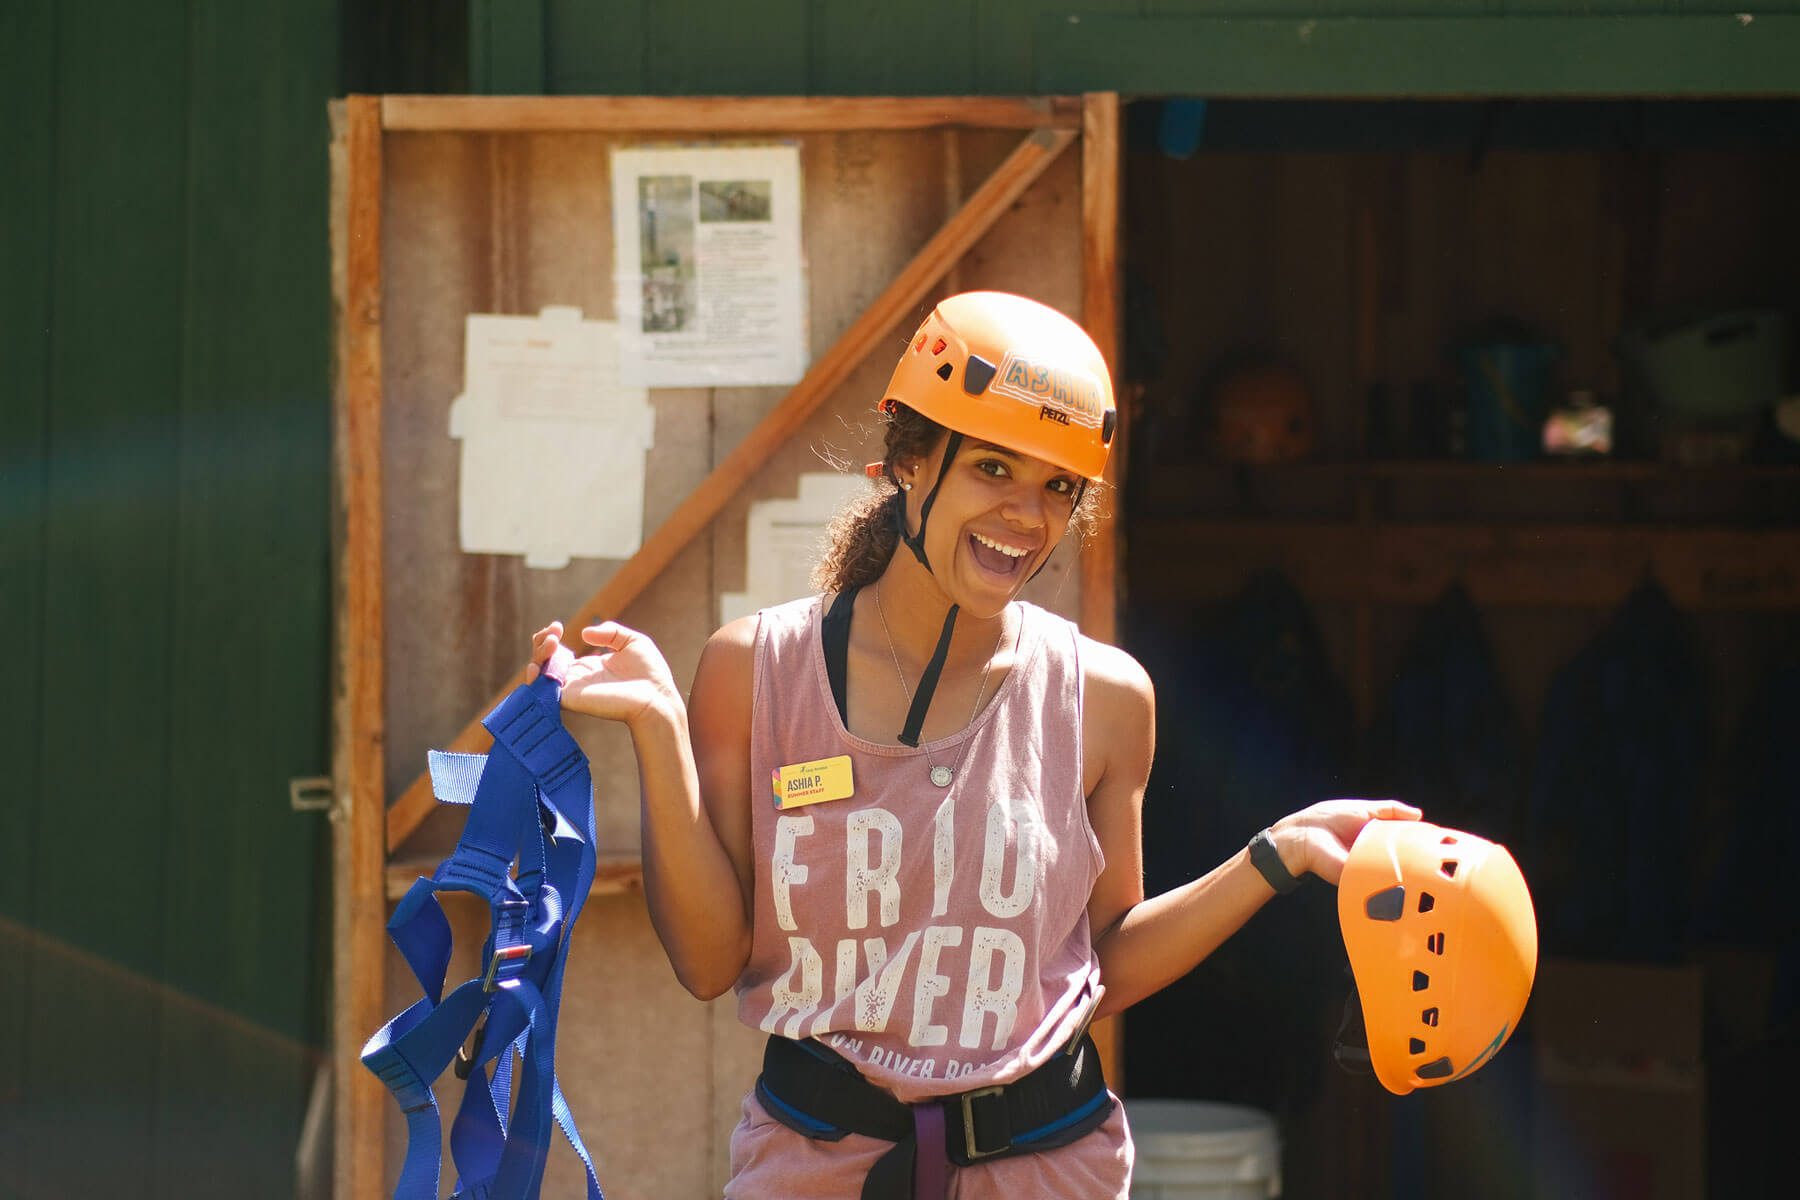 Summer camp counselor holding a helmet with a zipline harness